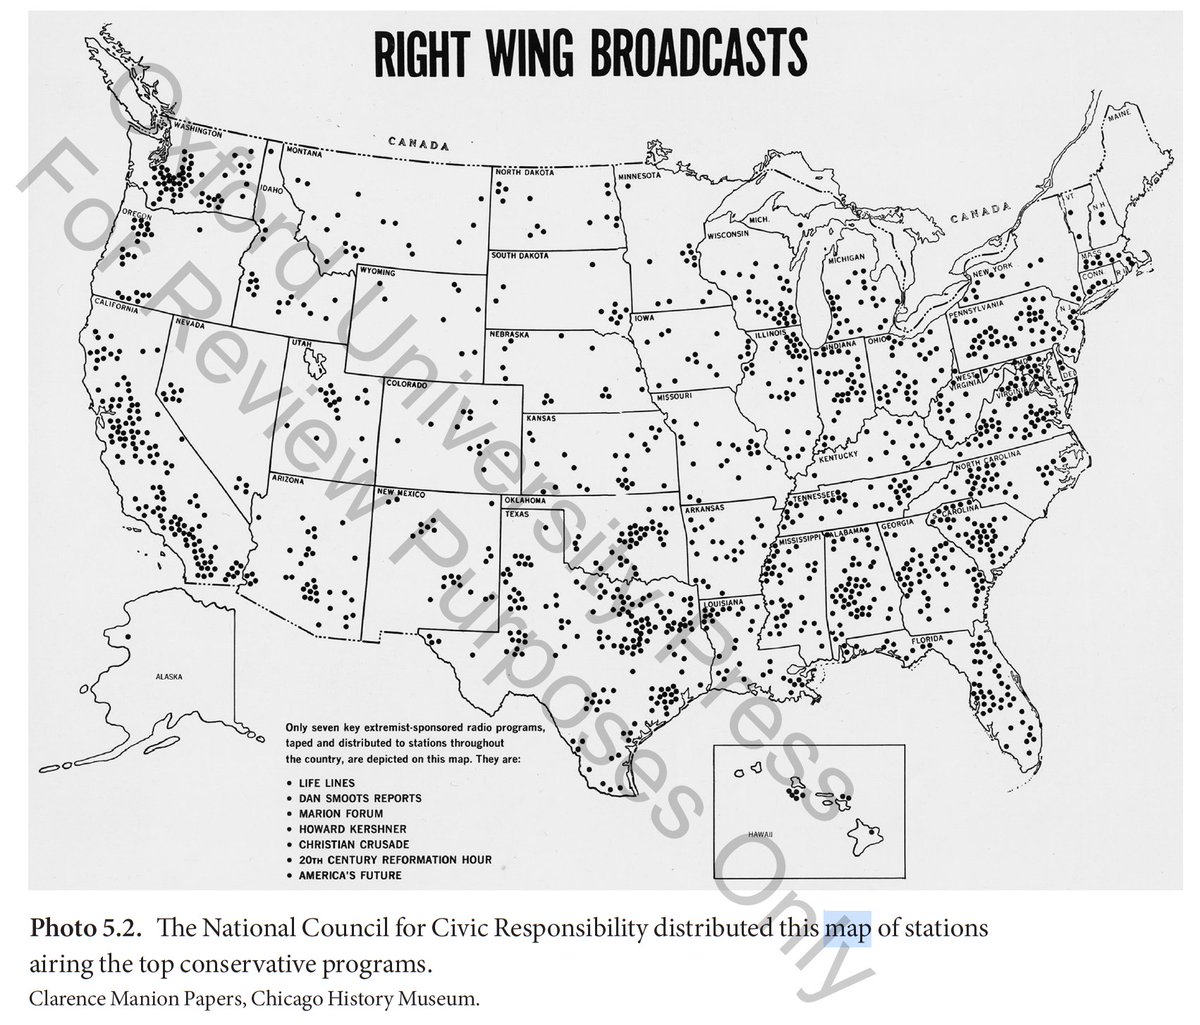 In the early 60s, President John F. Kennedy had a right-wing radio problem. The airwaves were full of conservative broadcasters on hundreds of stations nationwide with weekly audiences as large as 20 million (comparable to Rush Limbaugh at his peak four decades later).